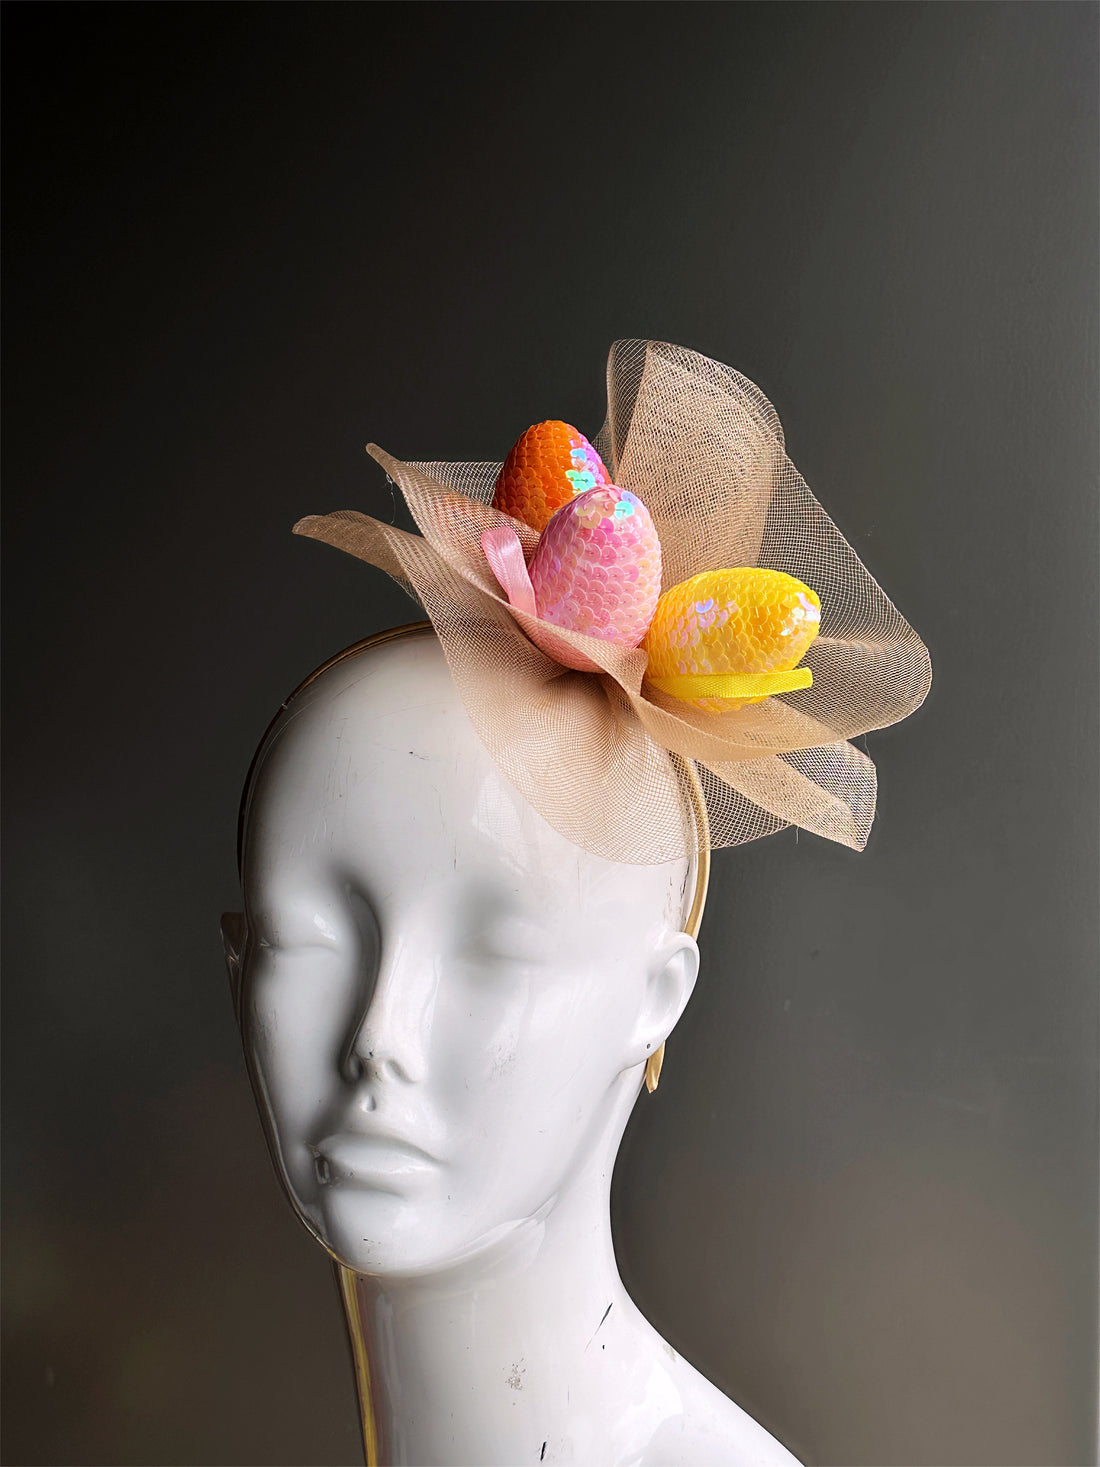 Headband with gold tulle and sequin easter eggs in orange, pink, and yellow.